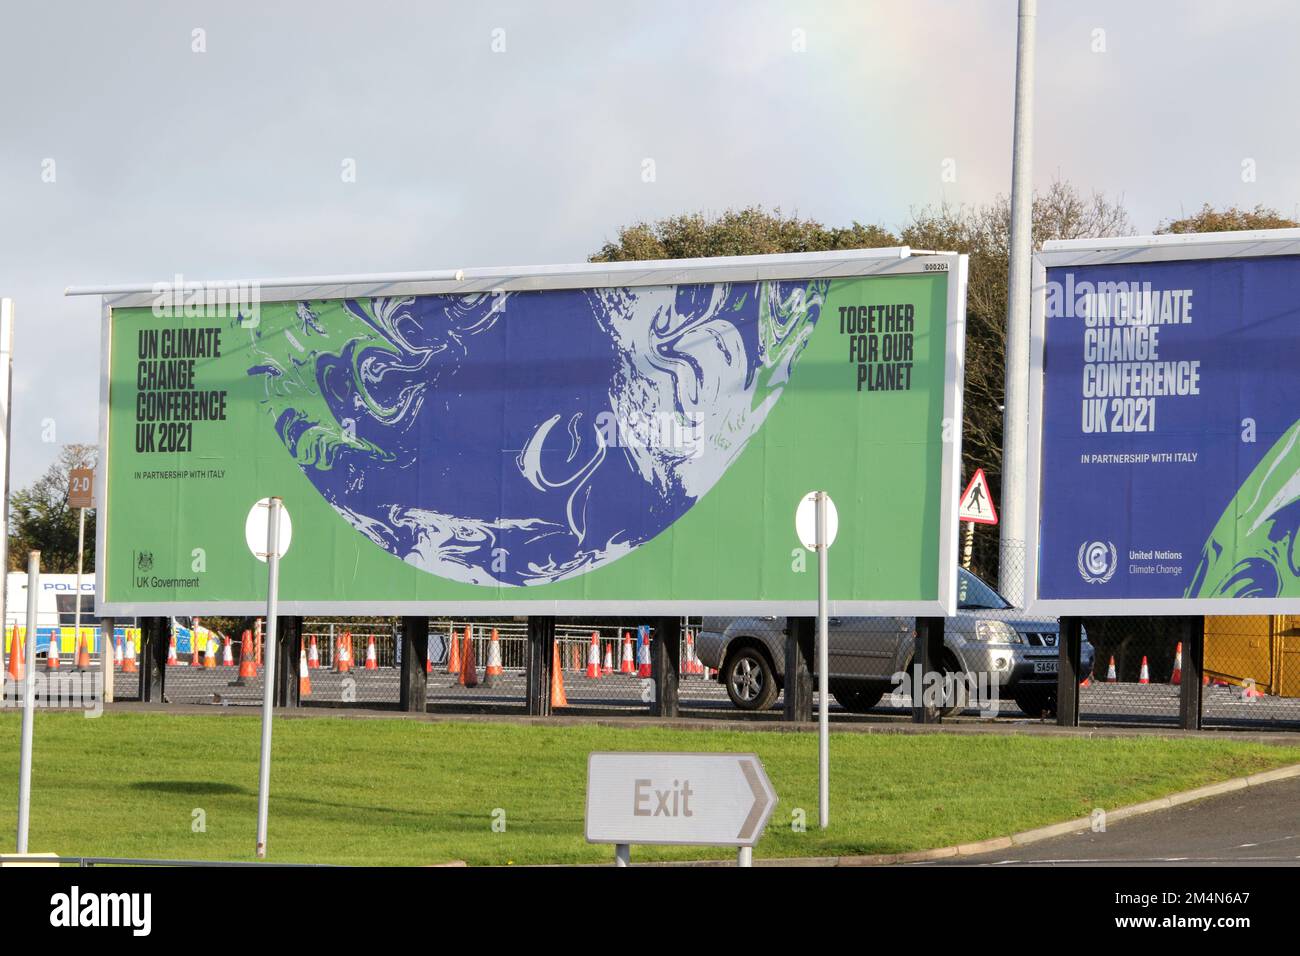 Glasgow Prestwick Airport, Prestwick, Ayrshire, Scotland, UK. Image shows large advertising hoarding promoting the UK Climate Change conference being held in Glasgow 2021. Known as COP 26. Stock Photo